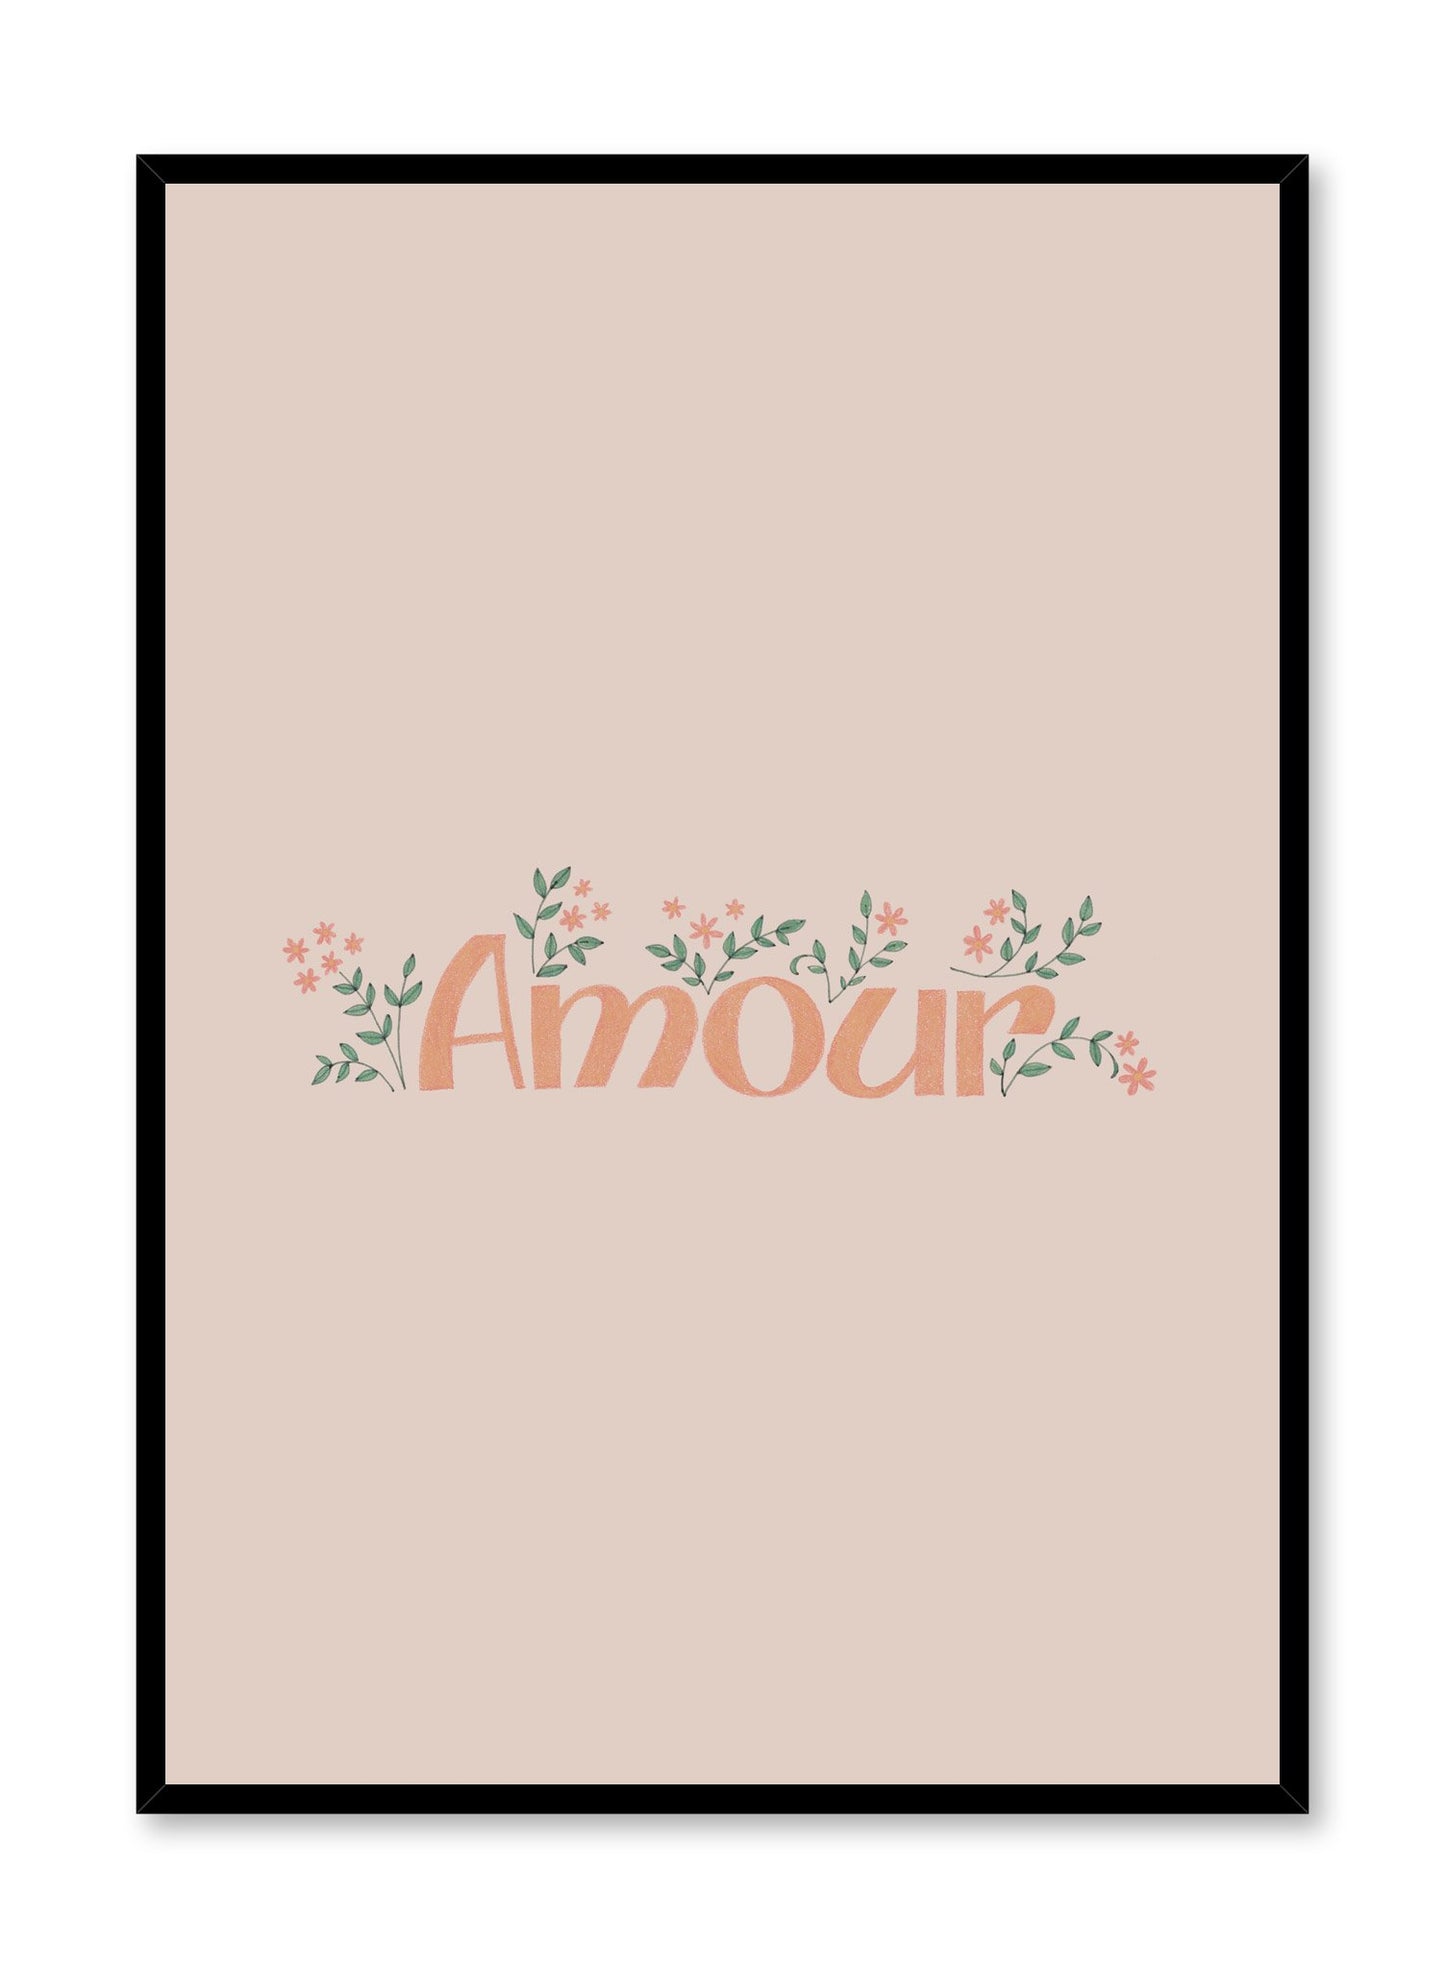 Modern minimalist botanical typography poster by Opposite Wall with Peachy Love amour in orange